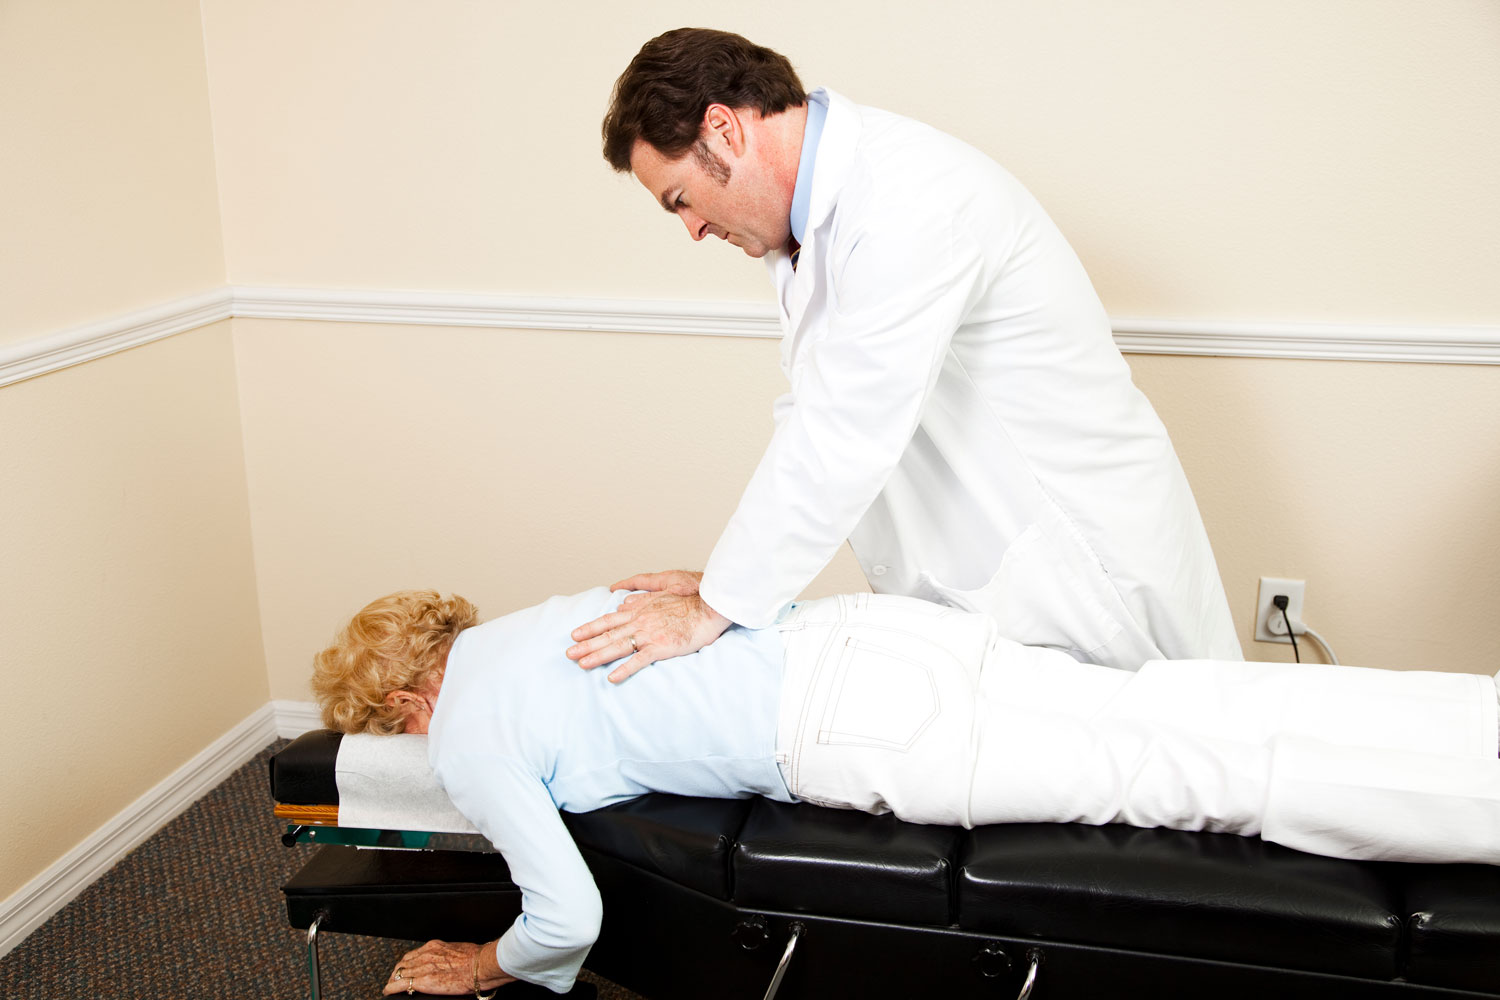 chiropractic care - optimal health and well being